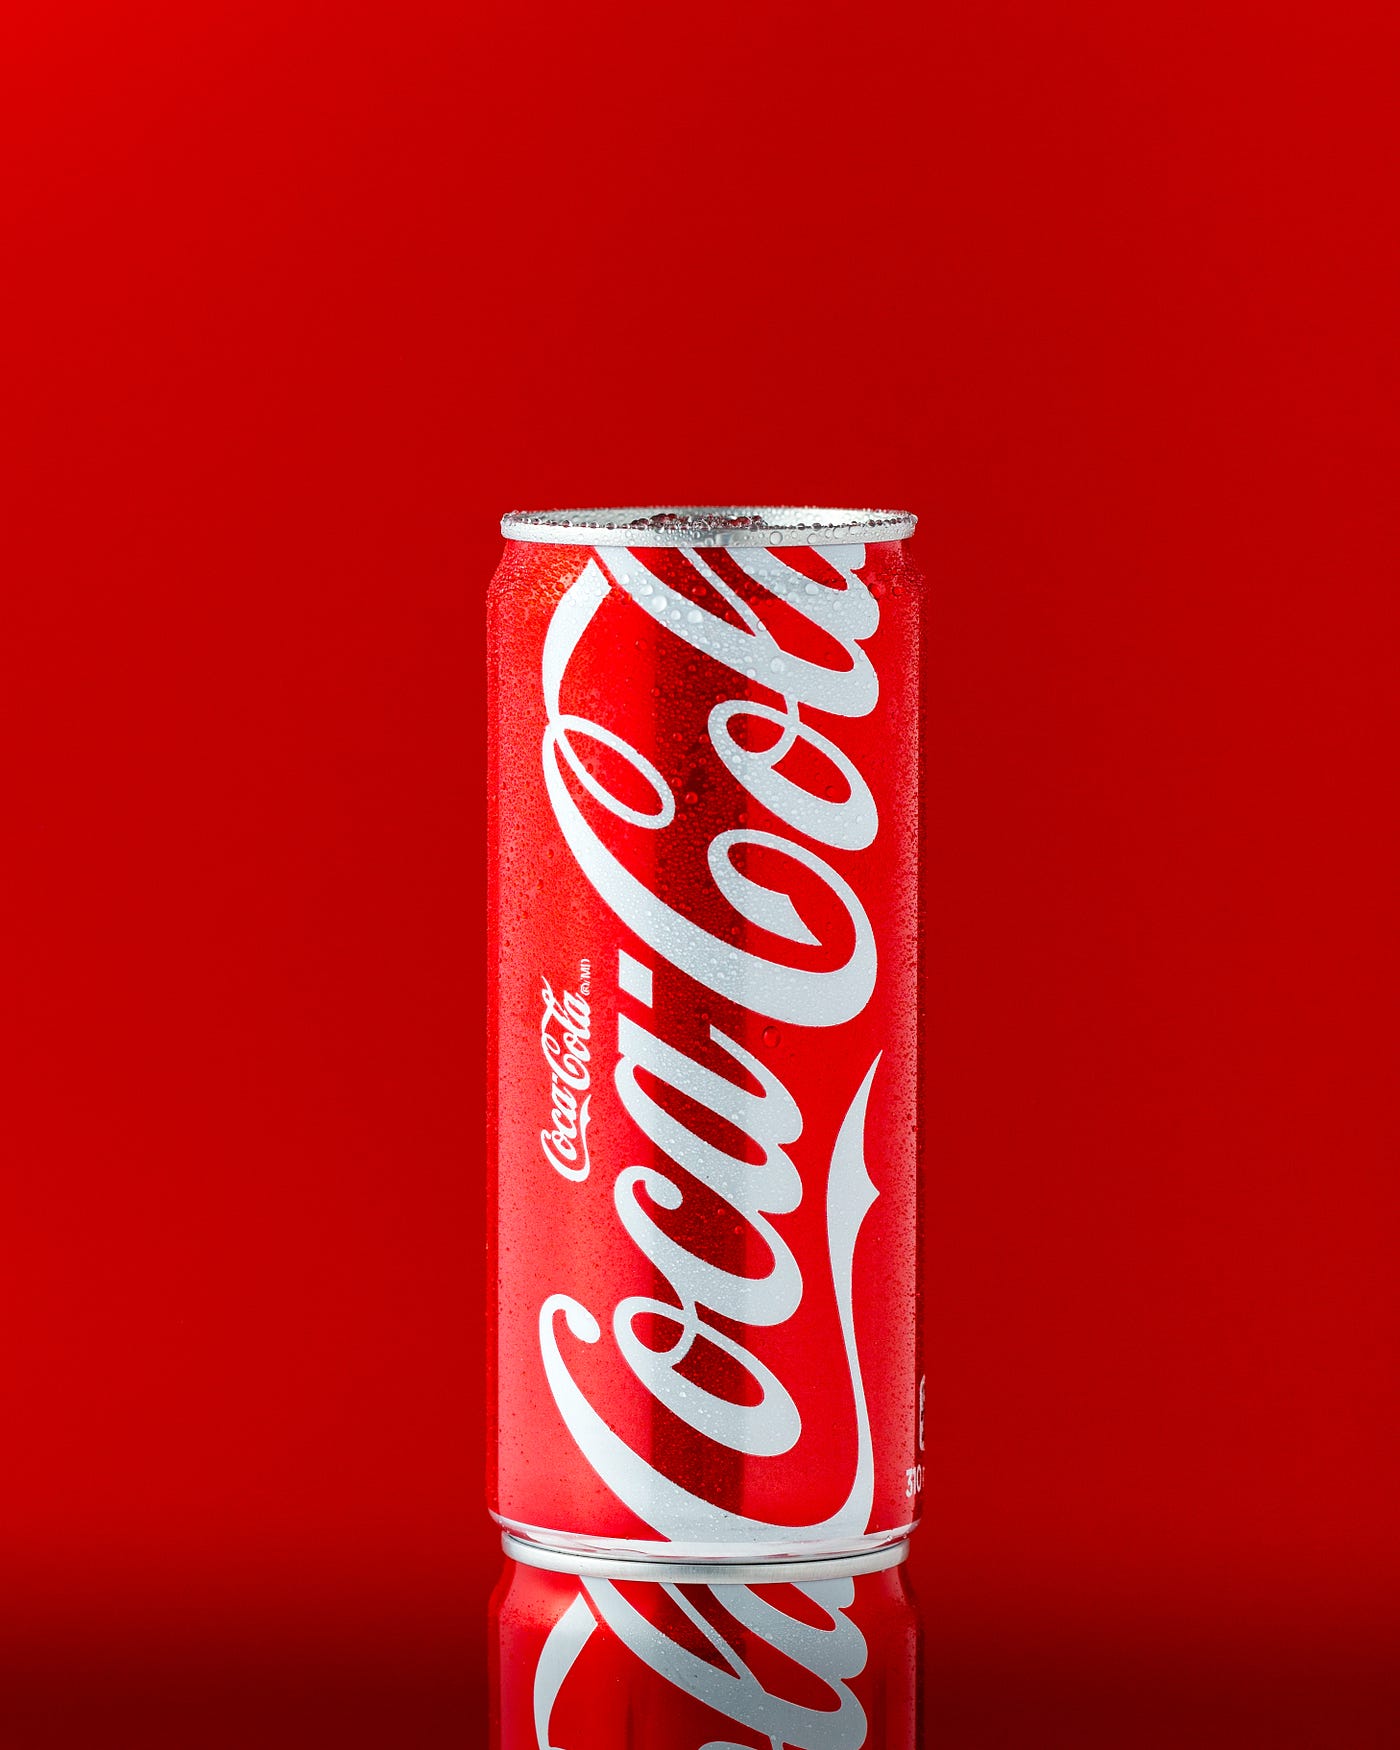 A thin can of Coca-Cola (with the classic lettering) is seen against a red background. Sodas are often full of fructose.